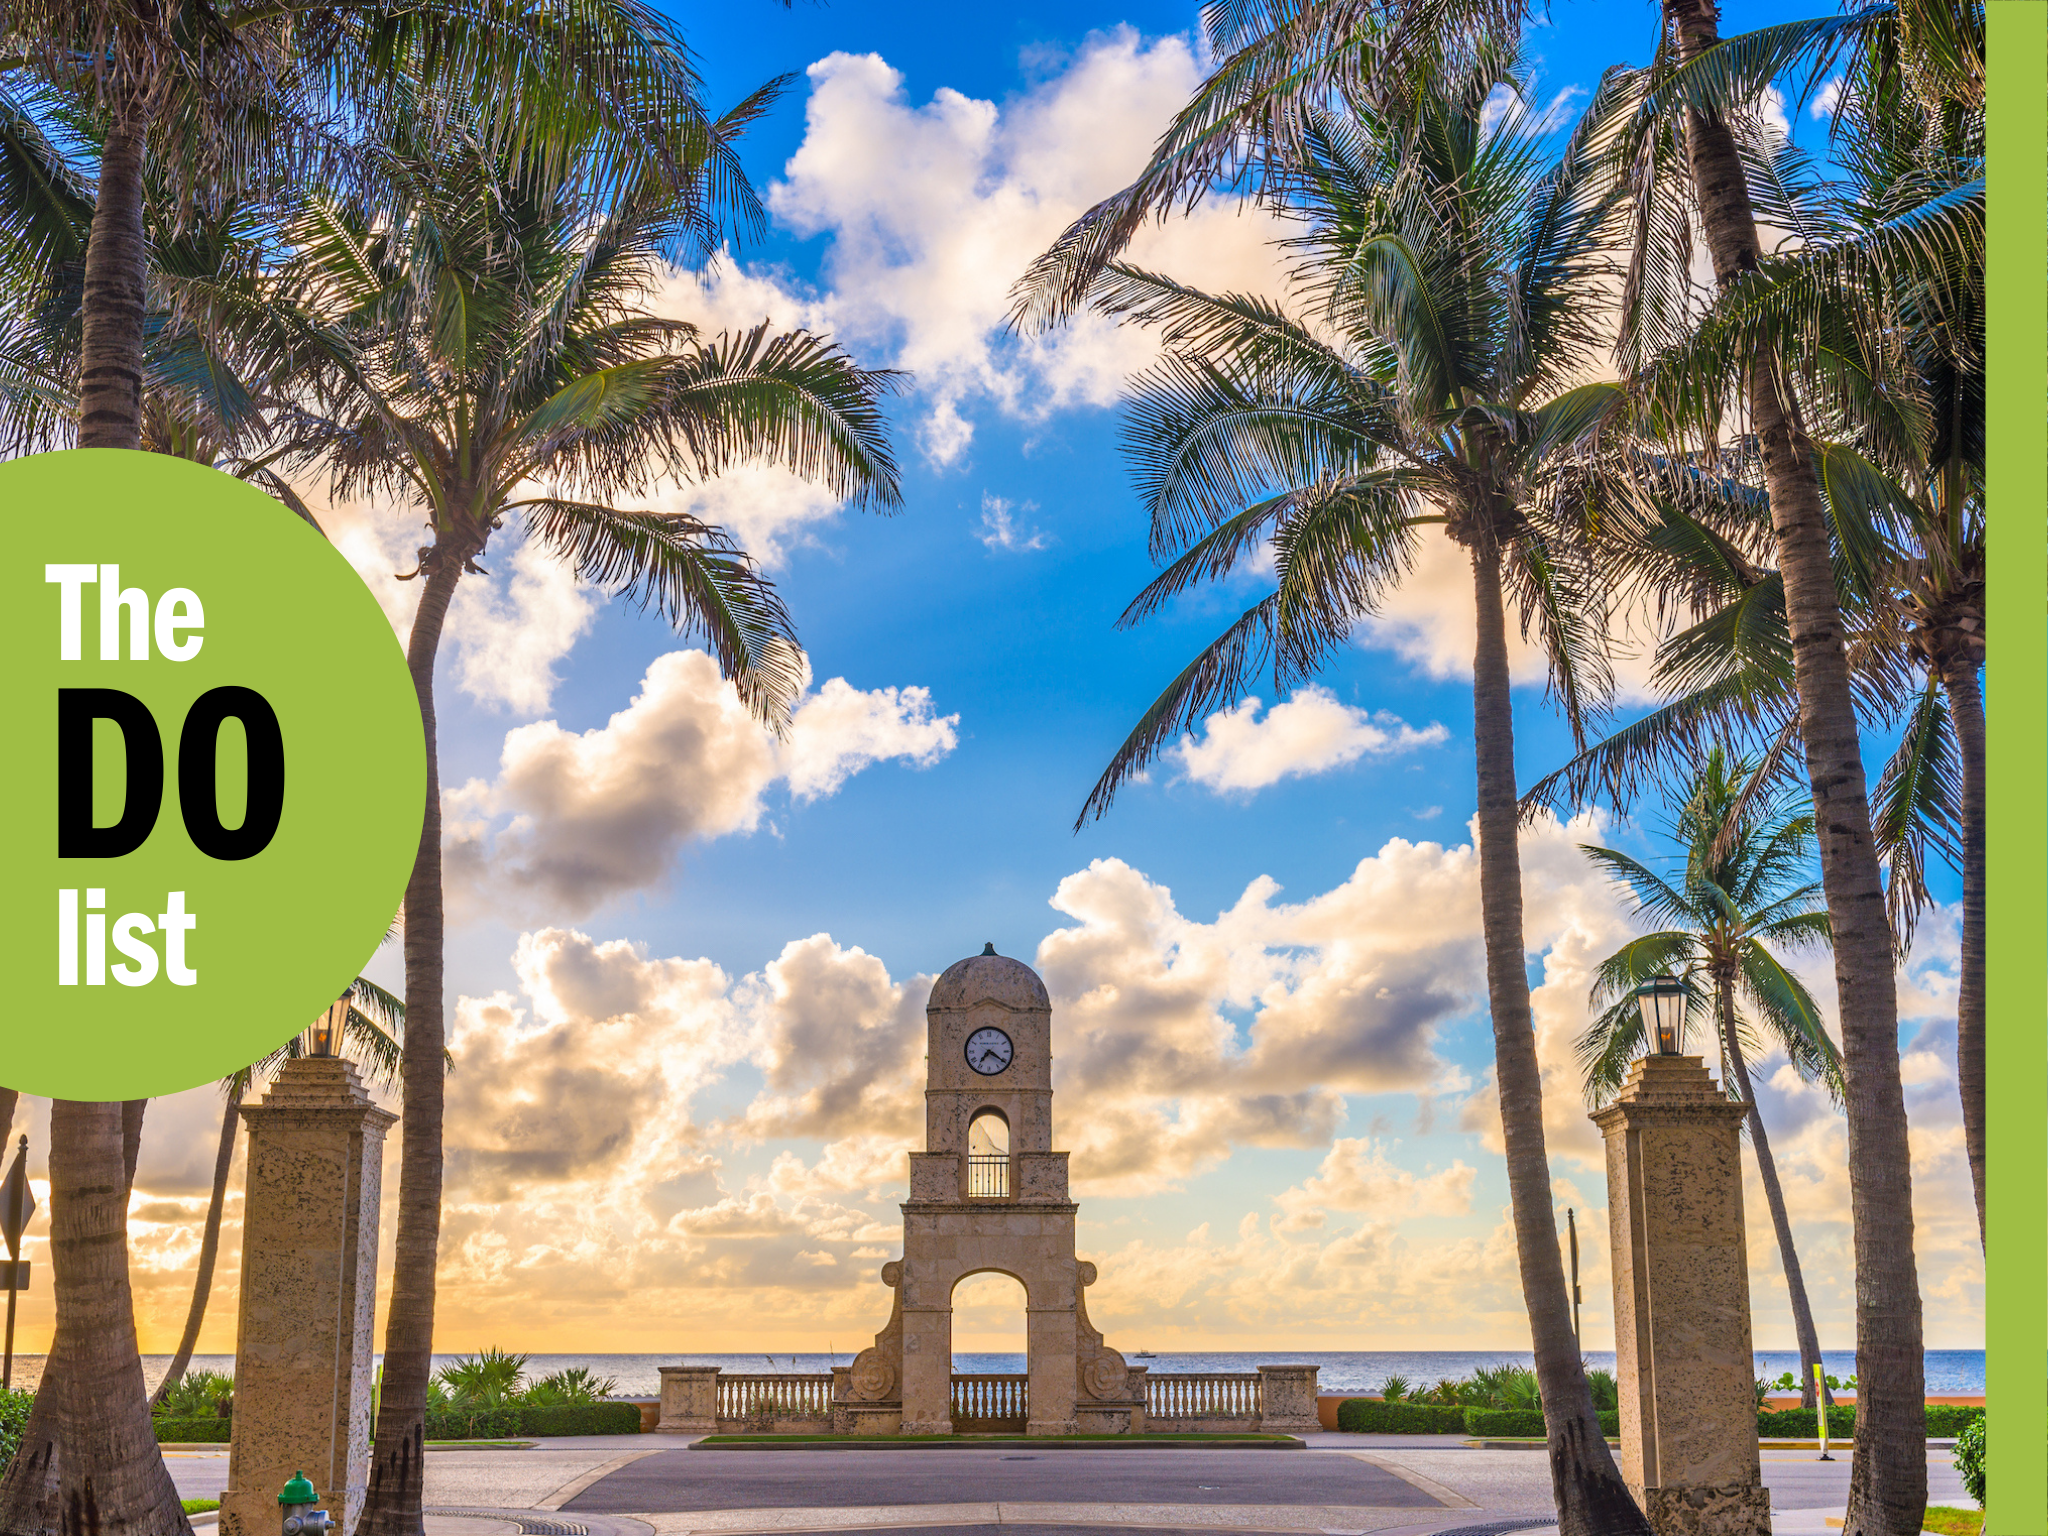 5 THINGS TO DO in PALM BEACH GARDENS, FLORIDA